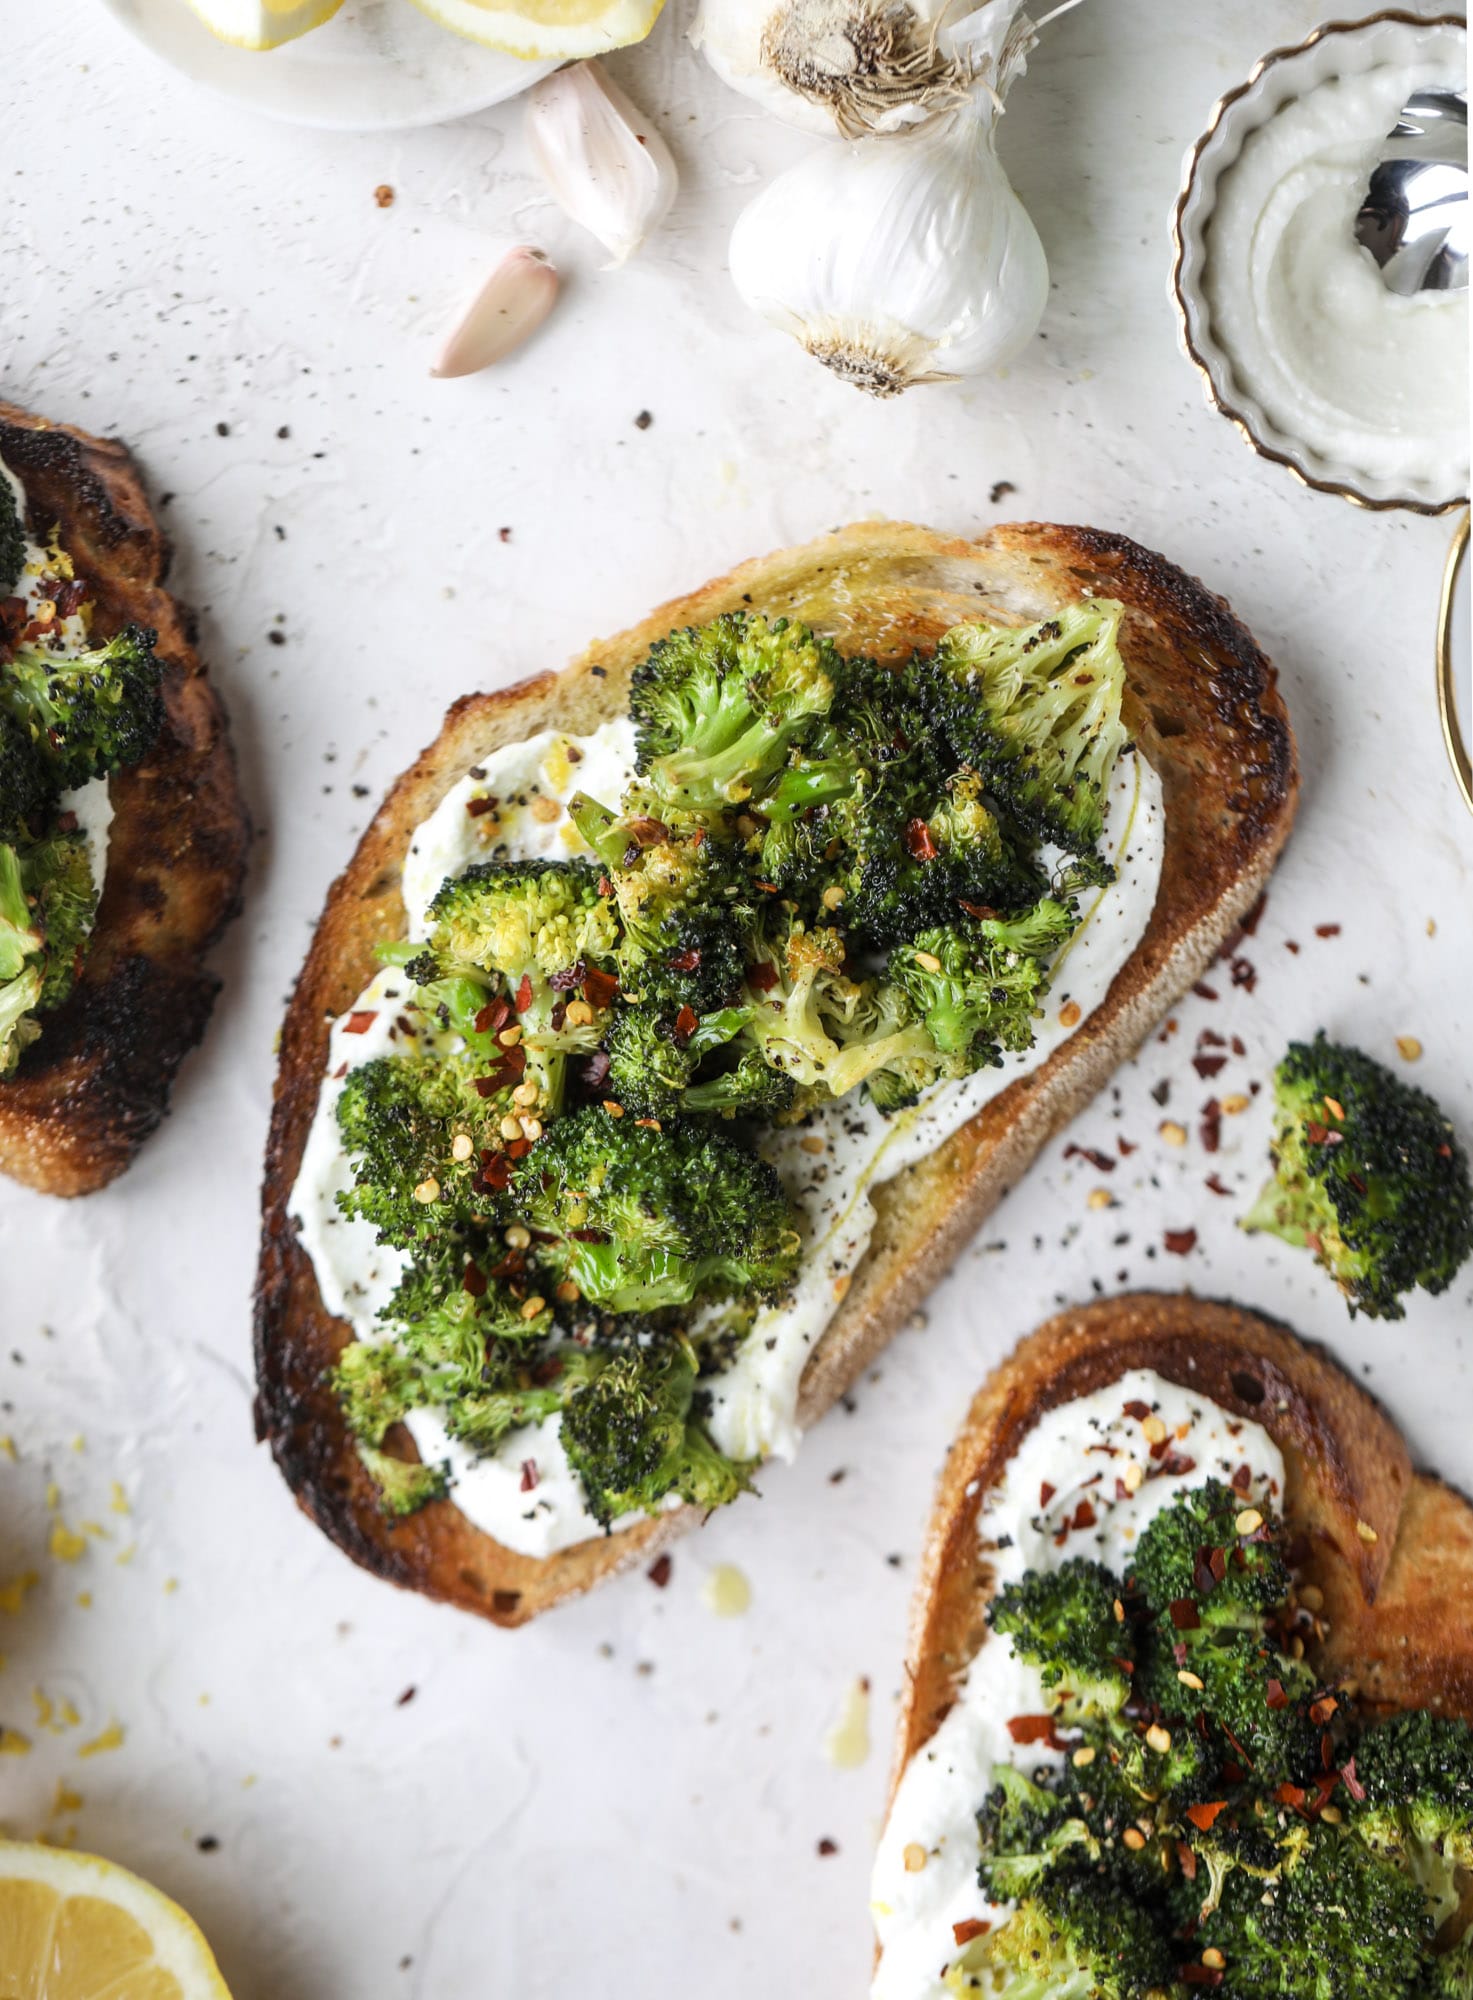 Broccoli toast is the best way to sneak in some veggies! Toasted sourdough with ricotta and roasted broccoli, topped with lemon and crushed red pepper. 